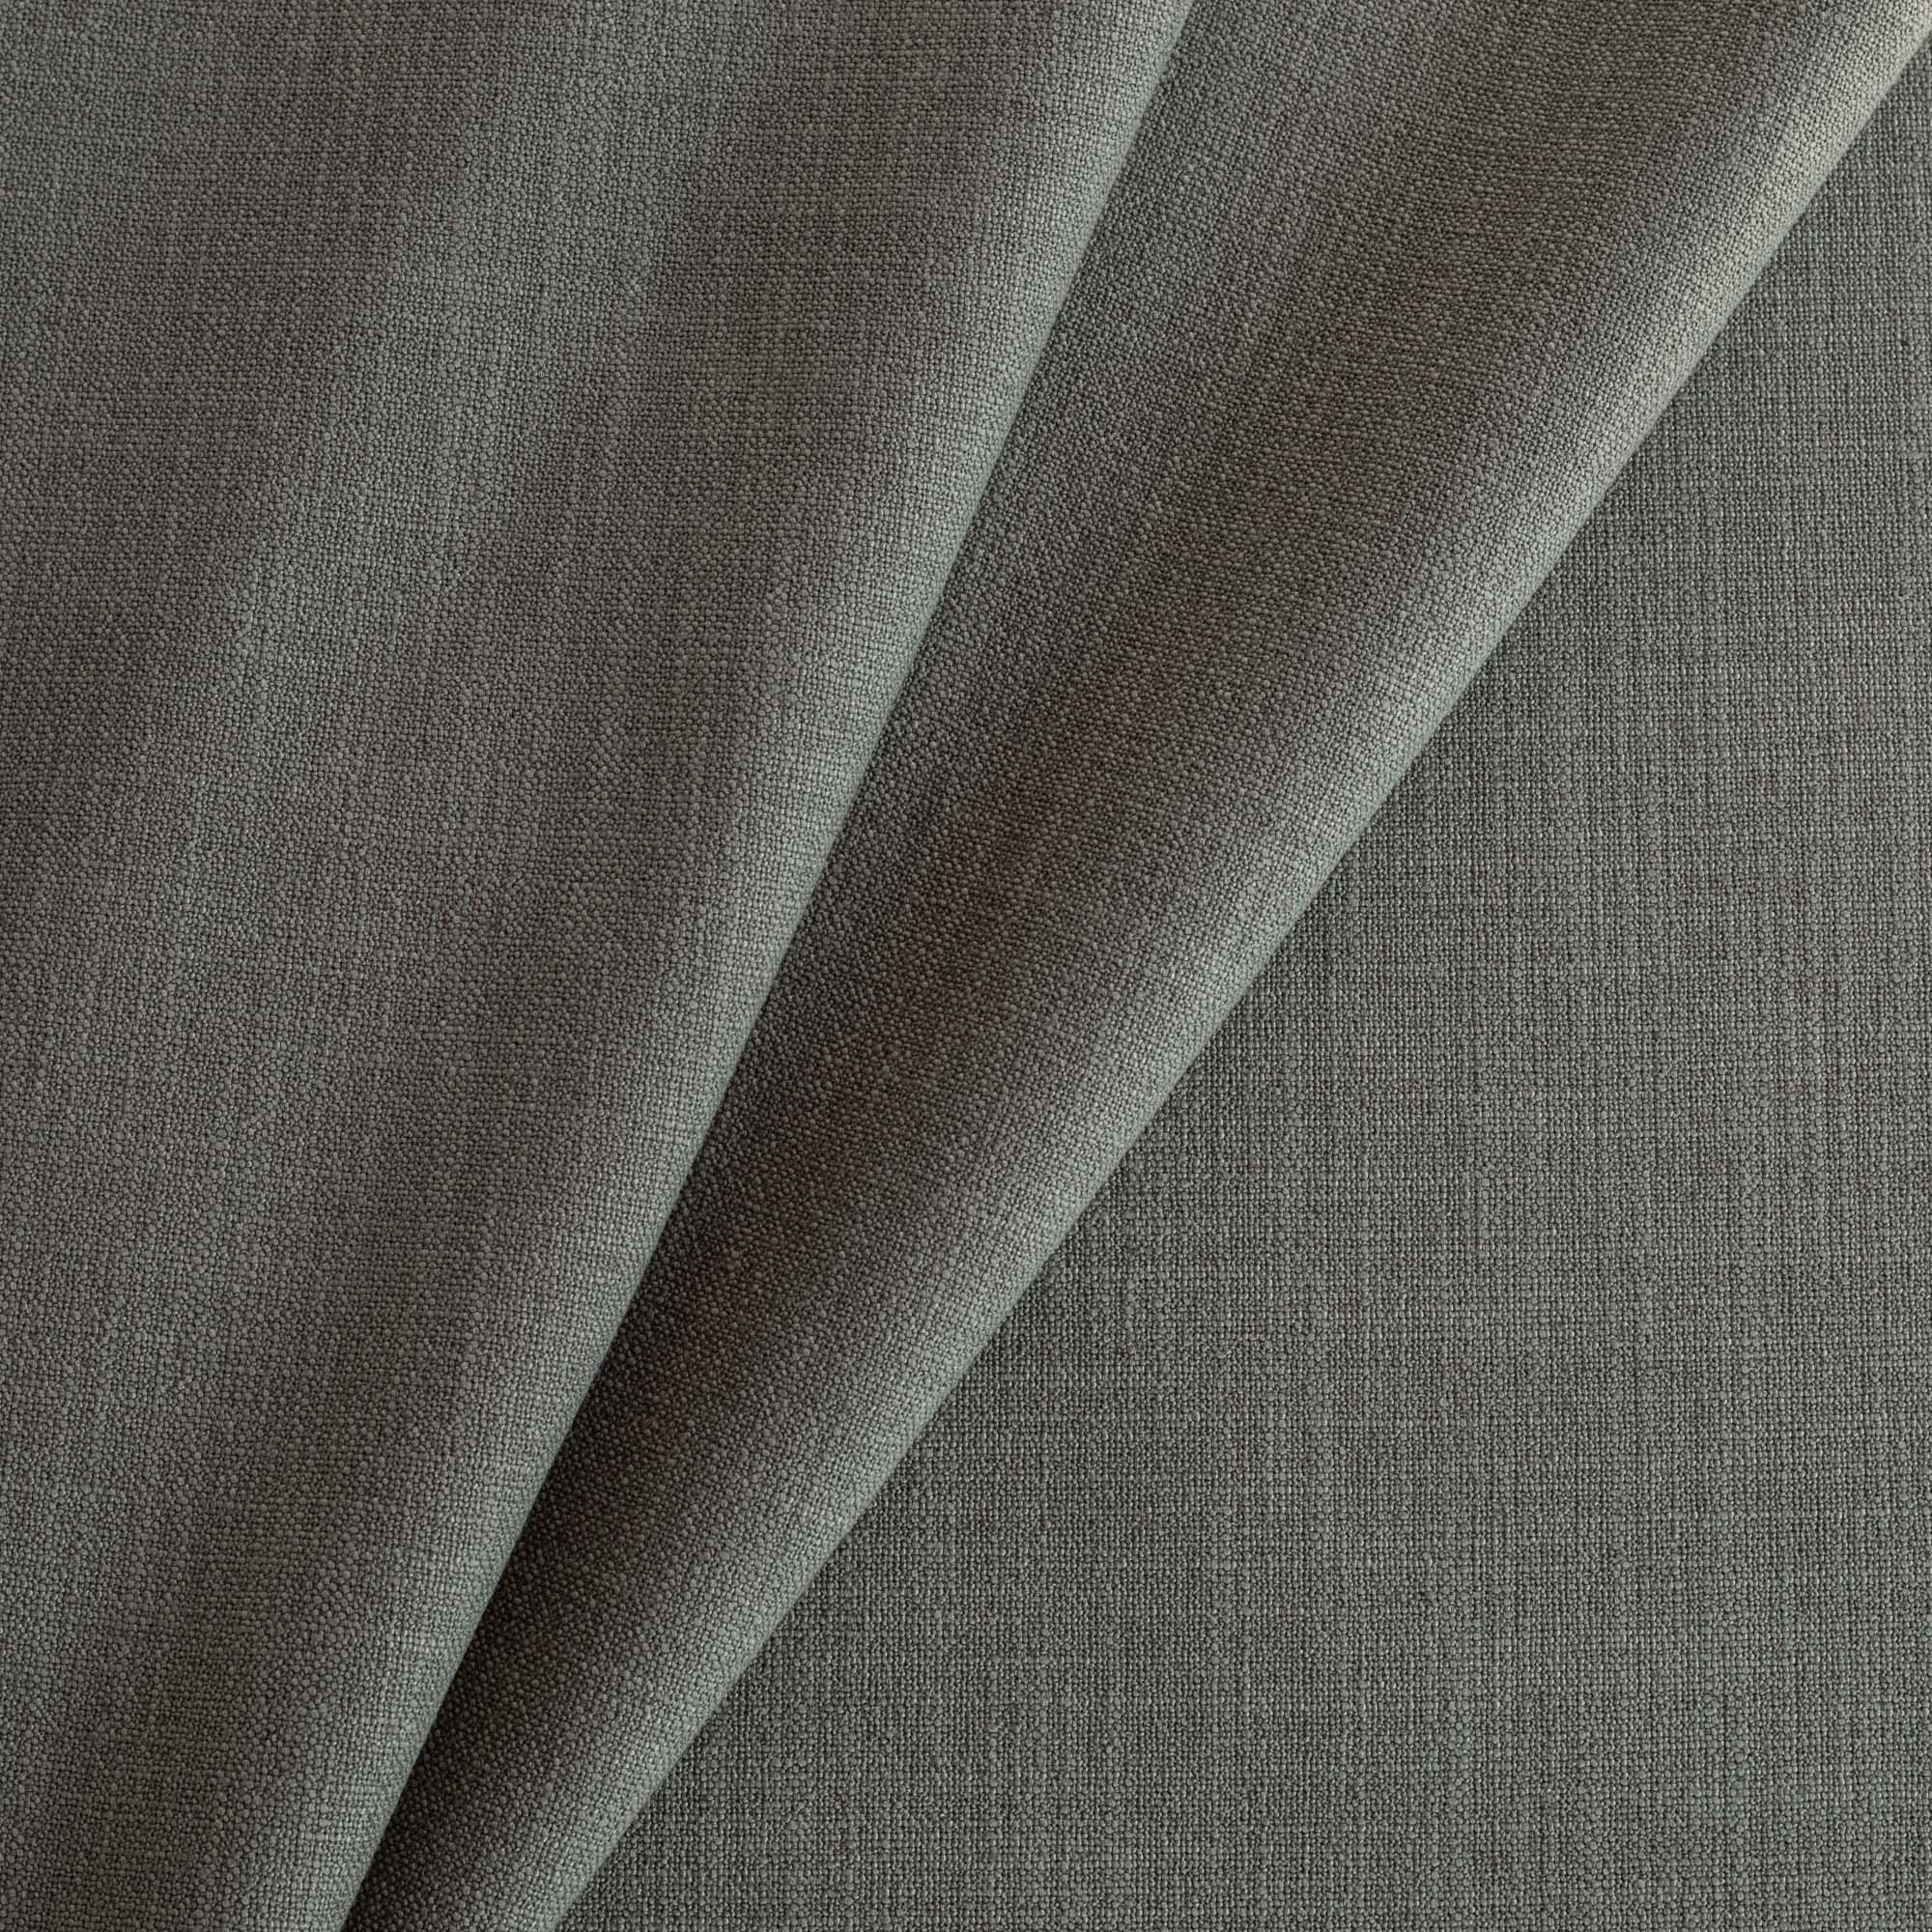 a deep charcoal grey high performance upholstery fabric 